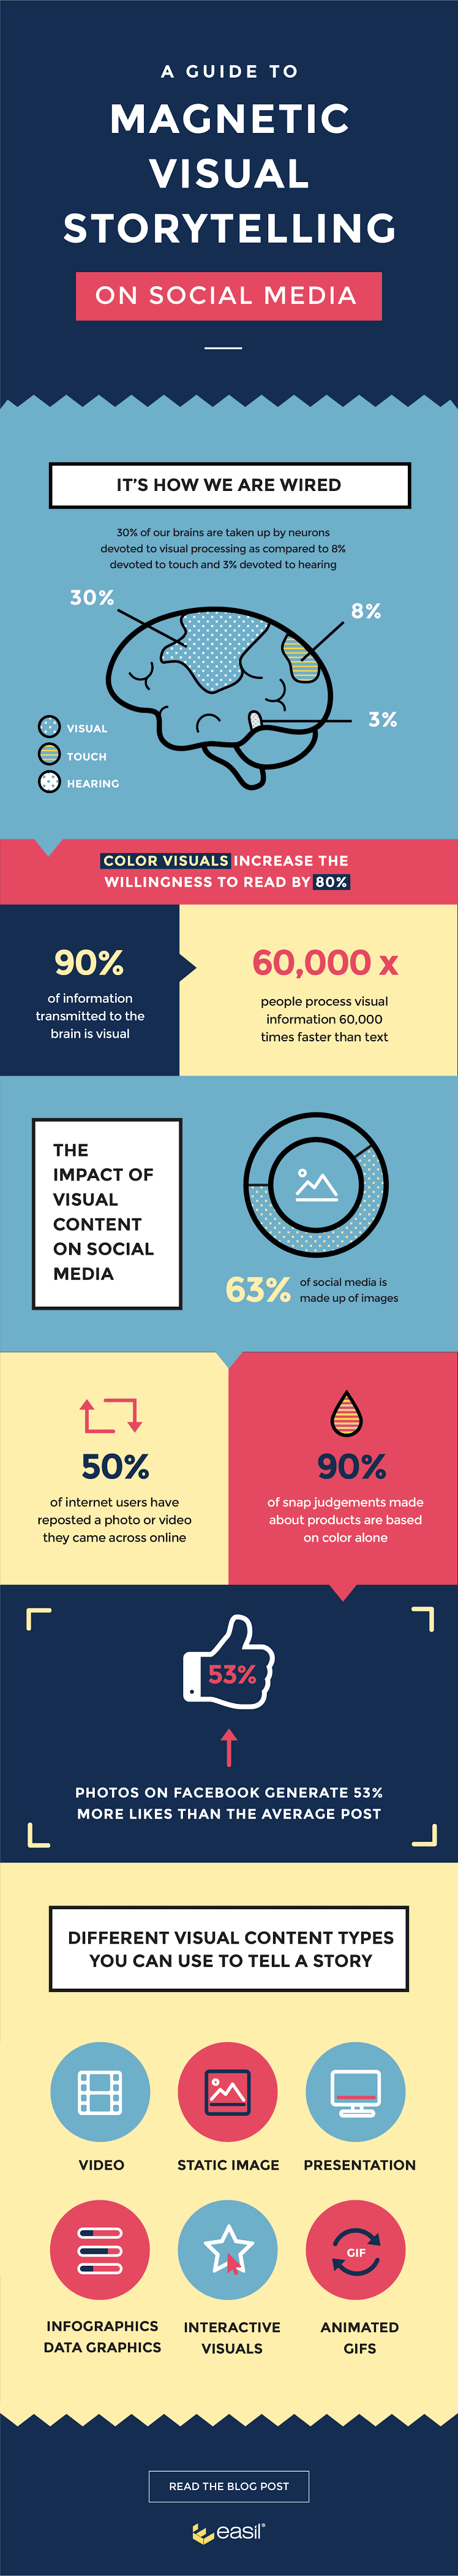 How to tell a magnetic visual story on social media - infographic